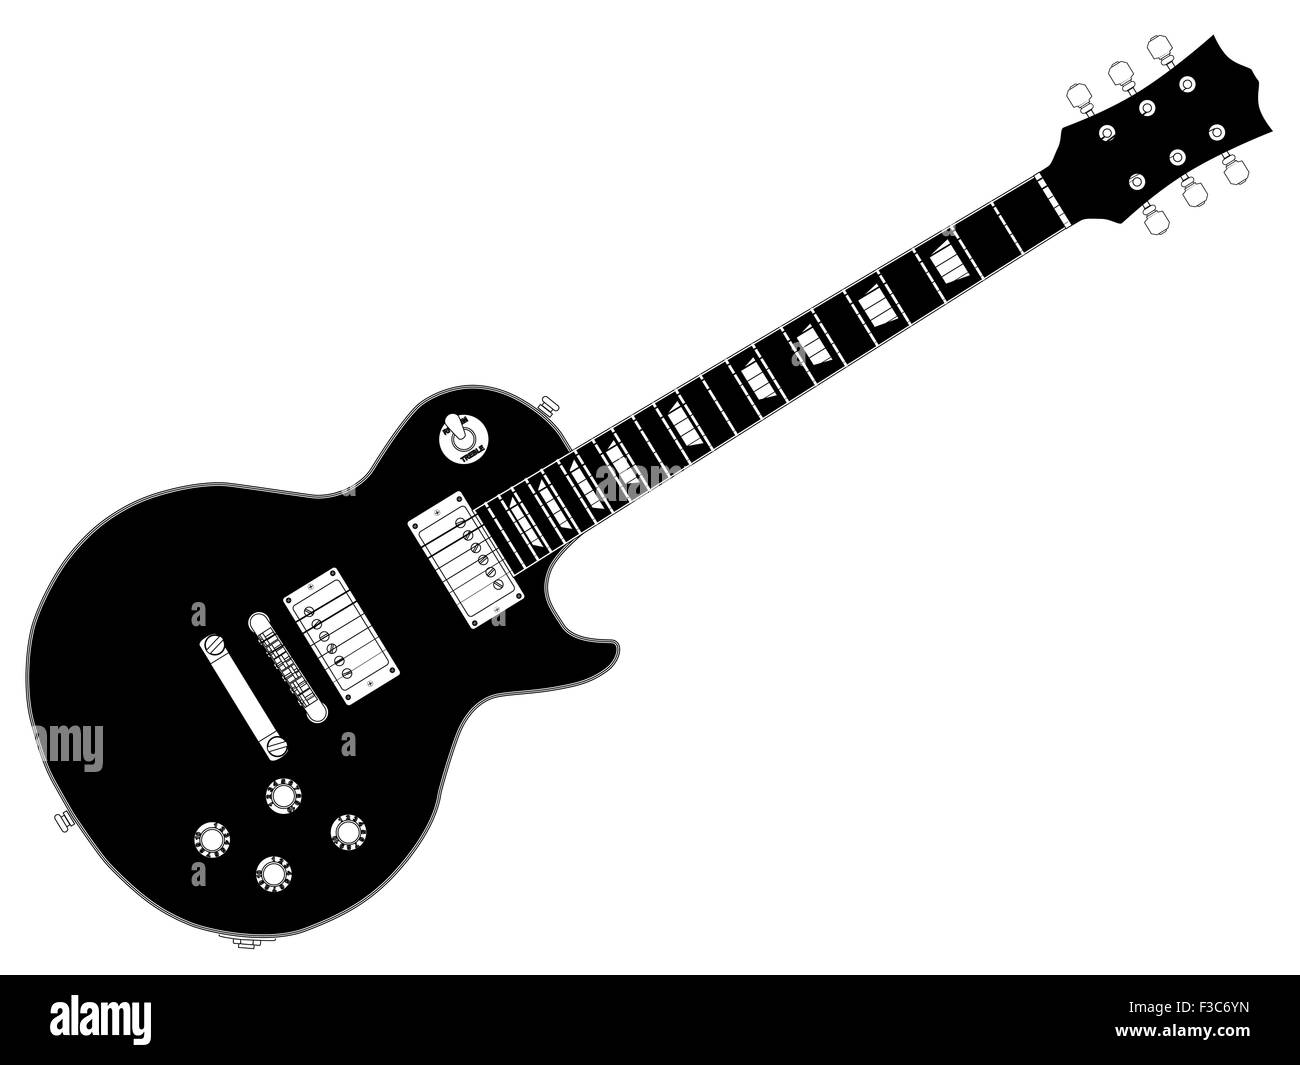 The definitive rock and roll guitar isolated over a white background. Stock Photo